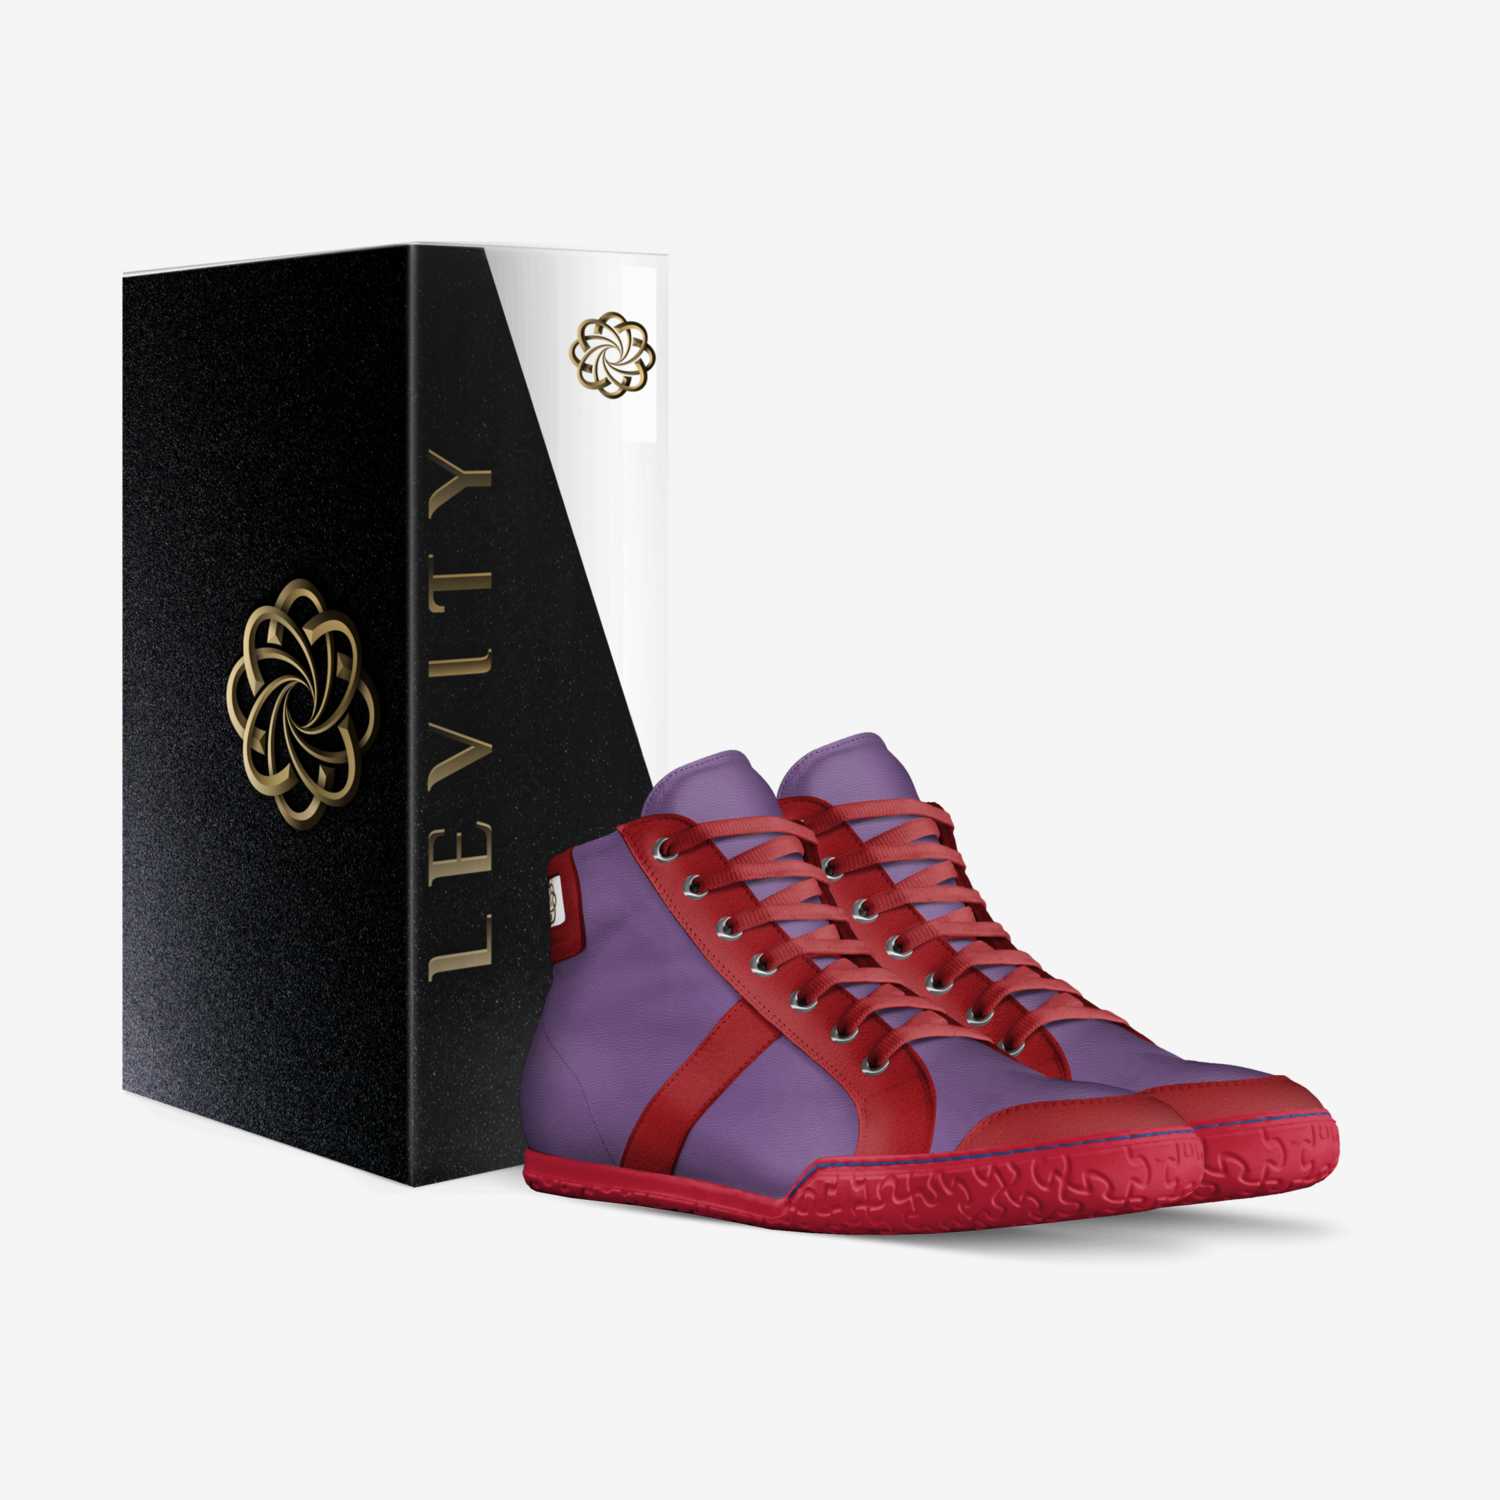 Levity Unnamed custom made in Italy shoes by Jafar Scott | Box view